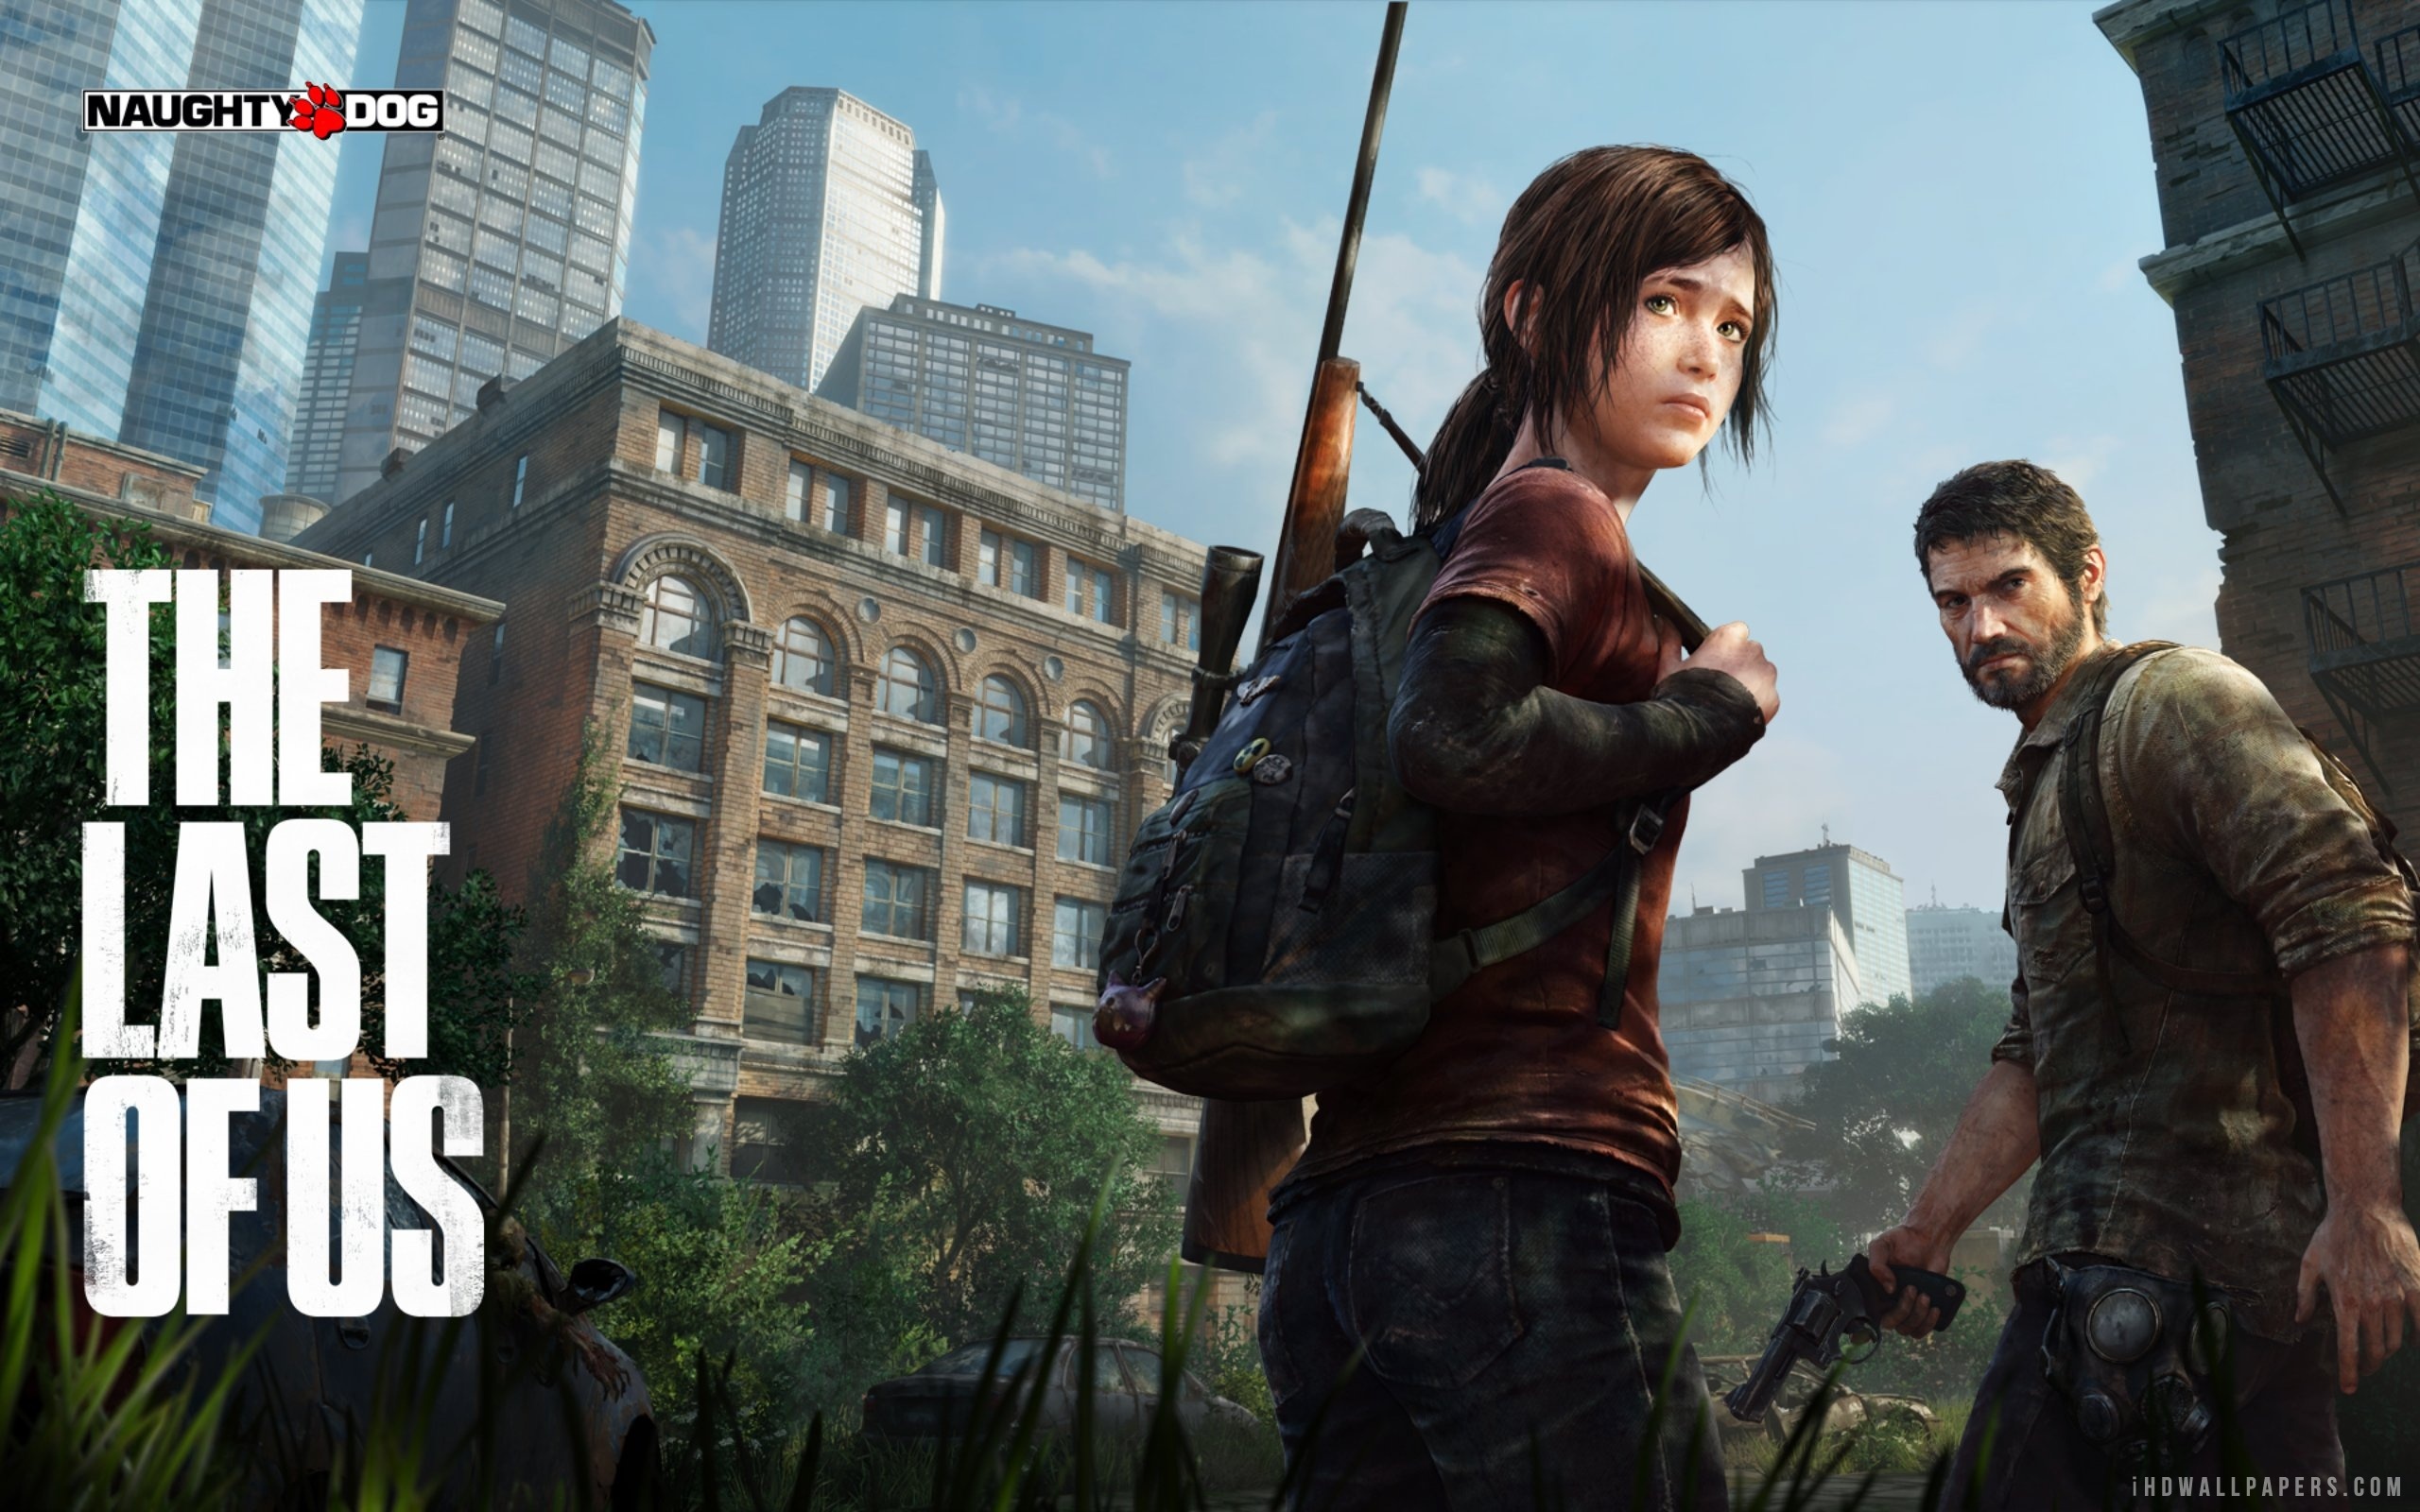 Download The Last of Us 2013 Game WallpaperBackground in 2560x1600 HD